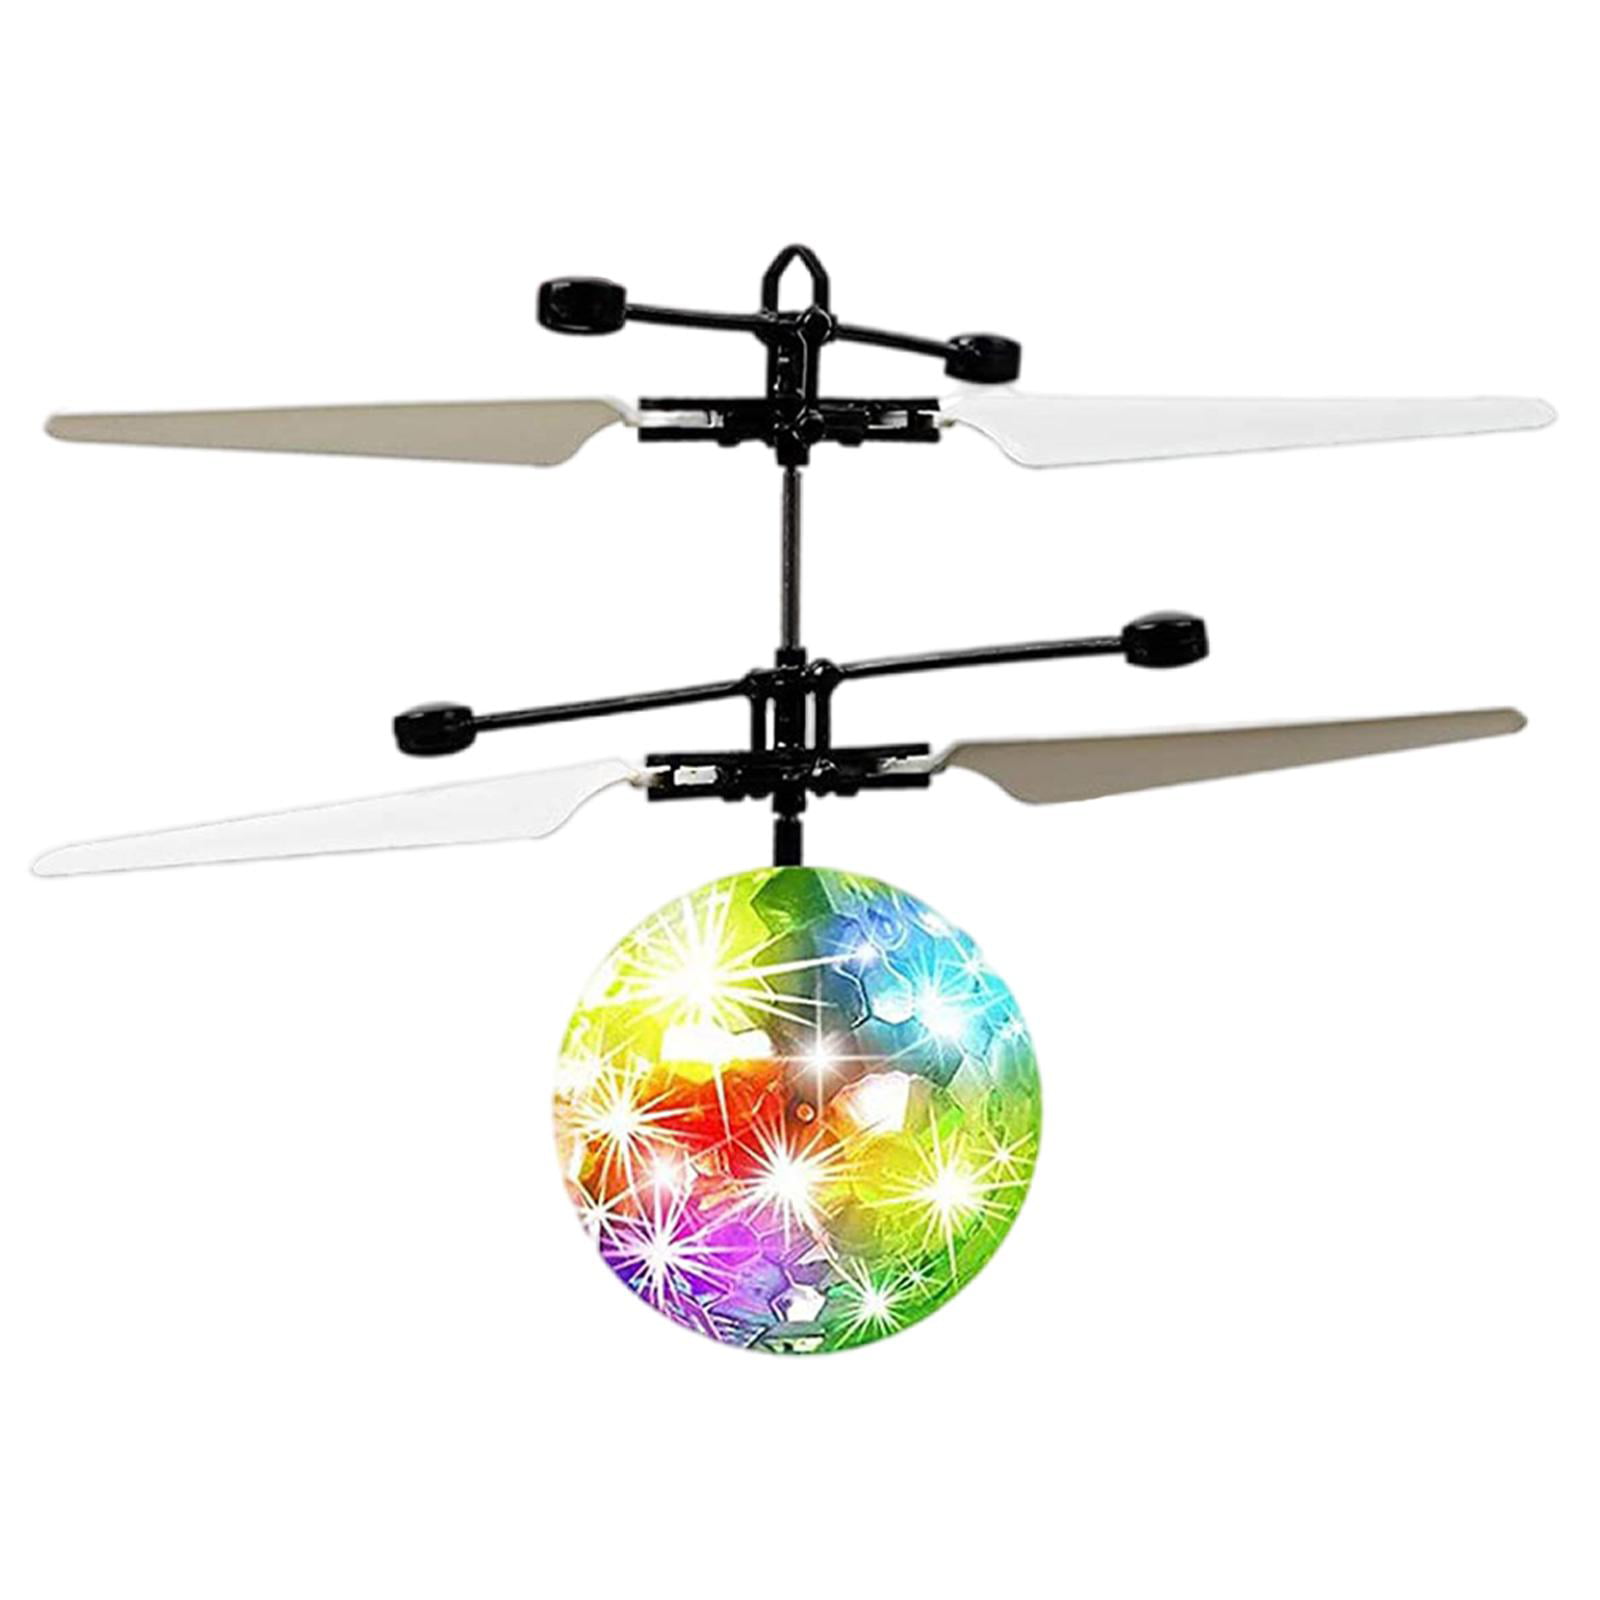 UFO Flying BALL Toys Gravity Defying Hand-controlled Suspension Helicopter for sale online 